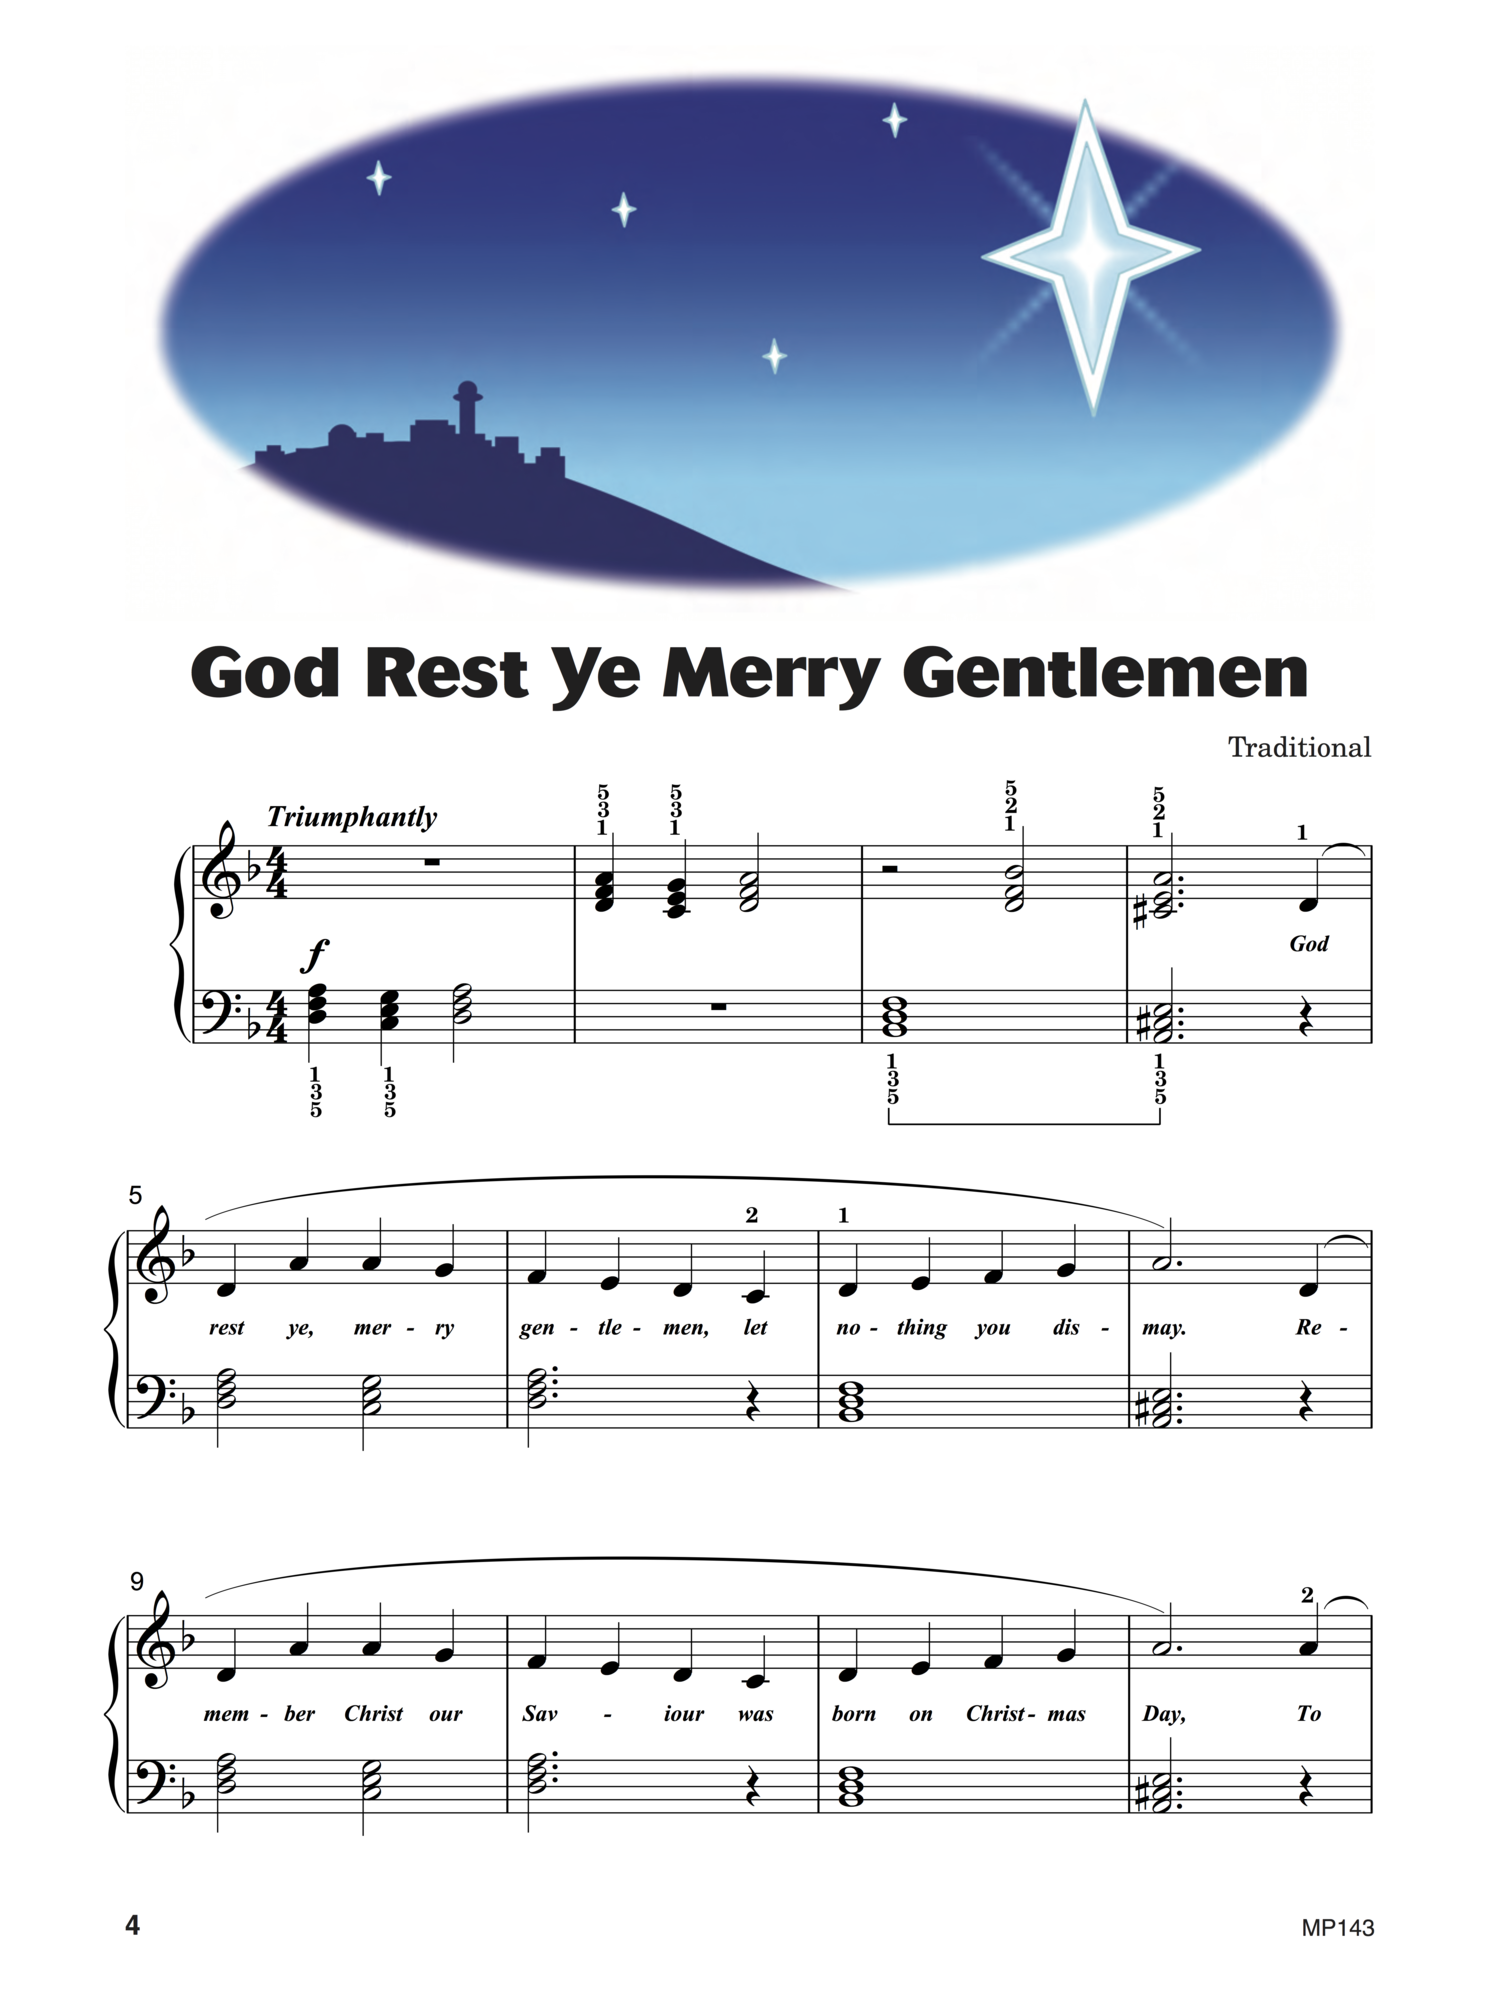 God Rest Ye Merry Gentlemen  from  Keith Snell & Diane Hidy's Level 3 Piano Town Christmas